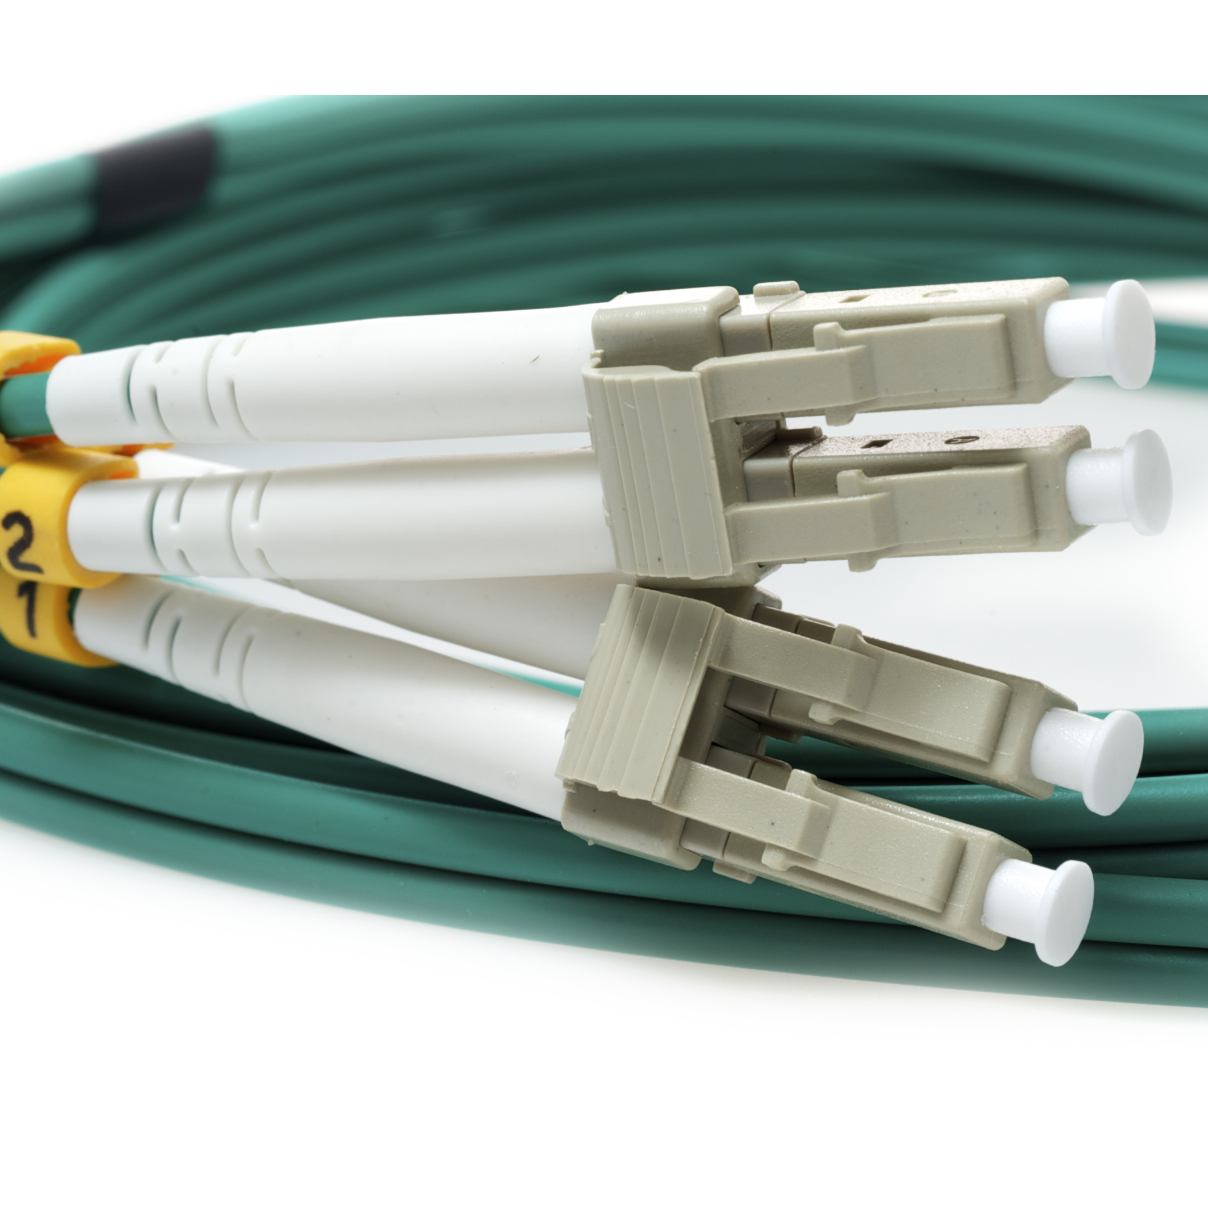 LC TO LC 10GB OM3 Duplex Multimode Fiber Optic Cable-10 Meter Green Jacket